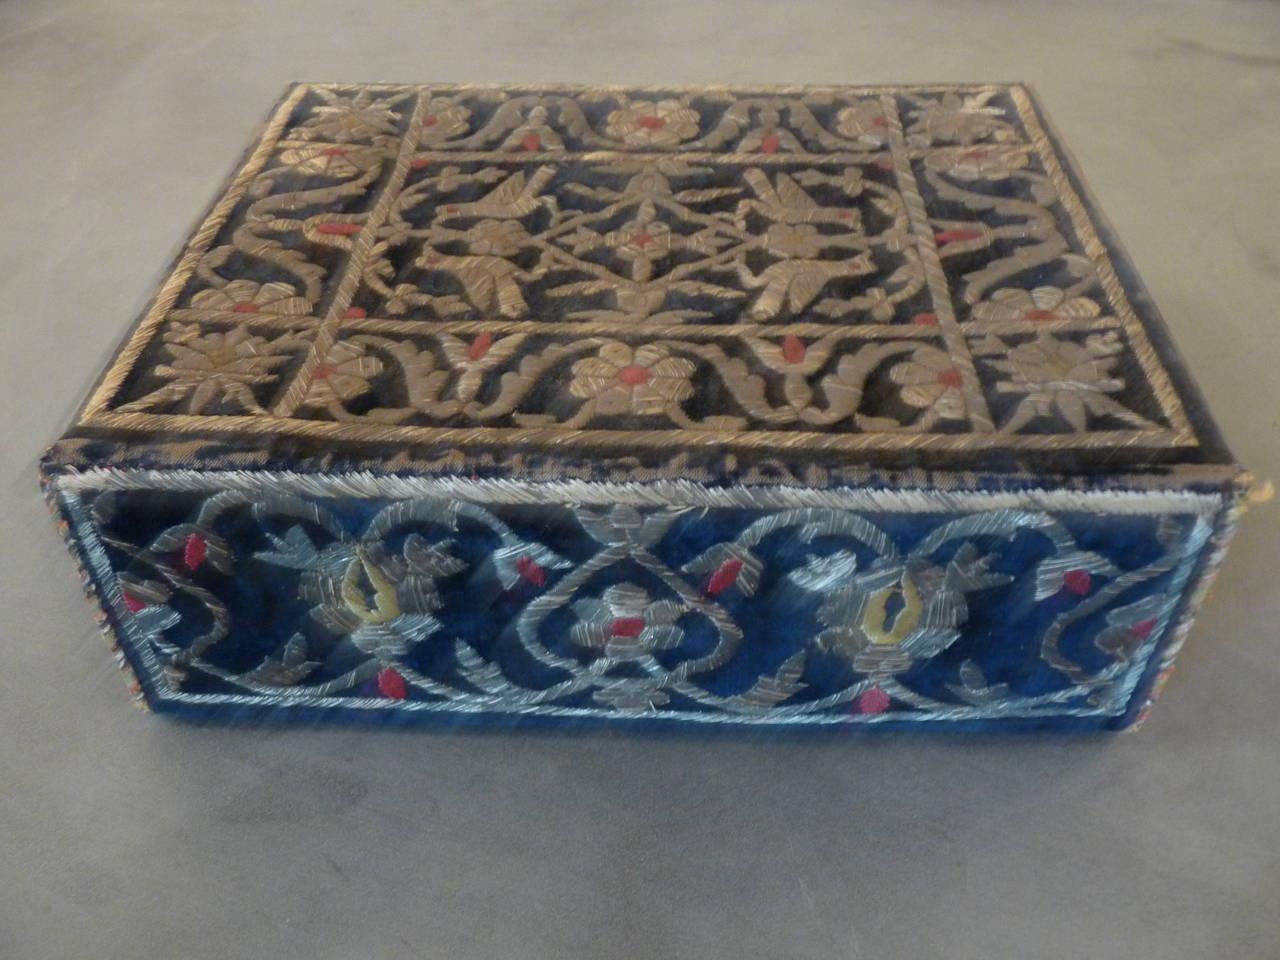 A beautifully and ornately embroidered velvet Ottoman box with silver trim and metallic thread. A very special piece. Traditionally may have been used as a Quran casket or dignitary gift. This would make a beautiful jewel or desk box.